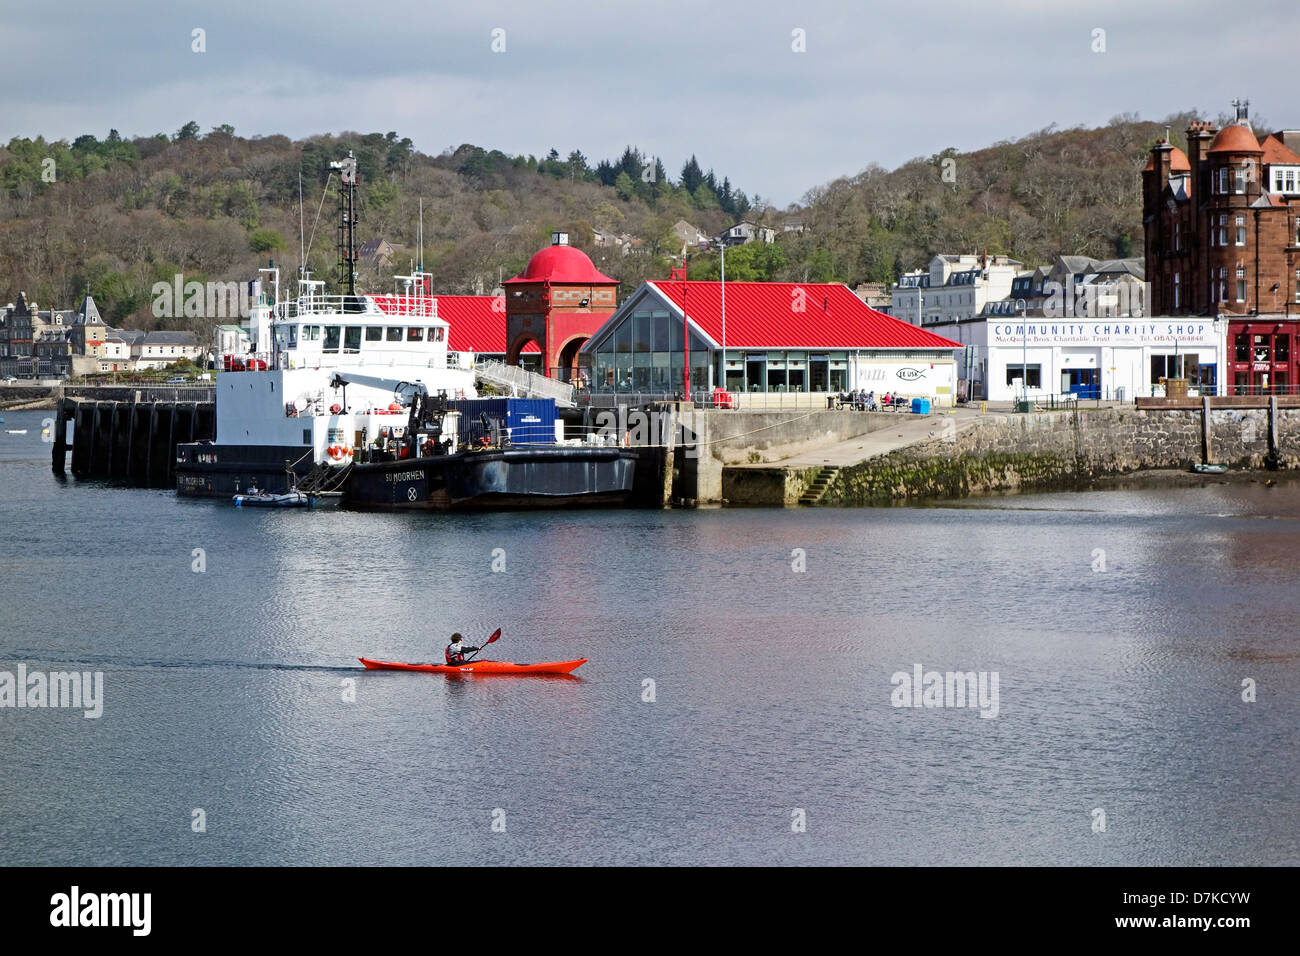 Diving platform vesses SD Moorhen moored at the North Pier in Oban Harbour Oban Scotland with kayak front Stock Photo